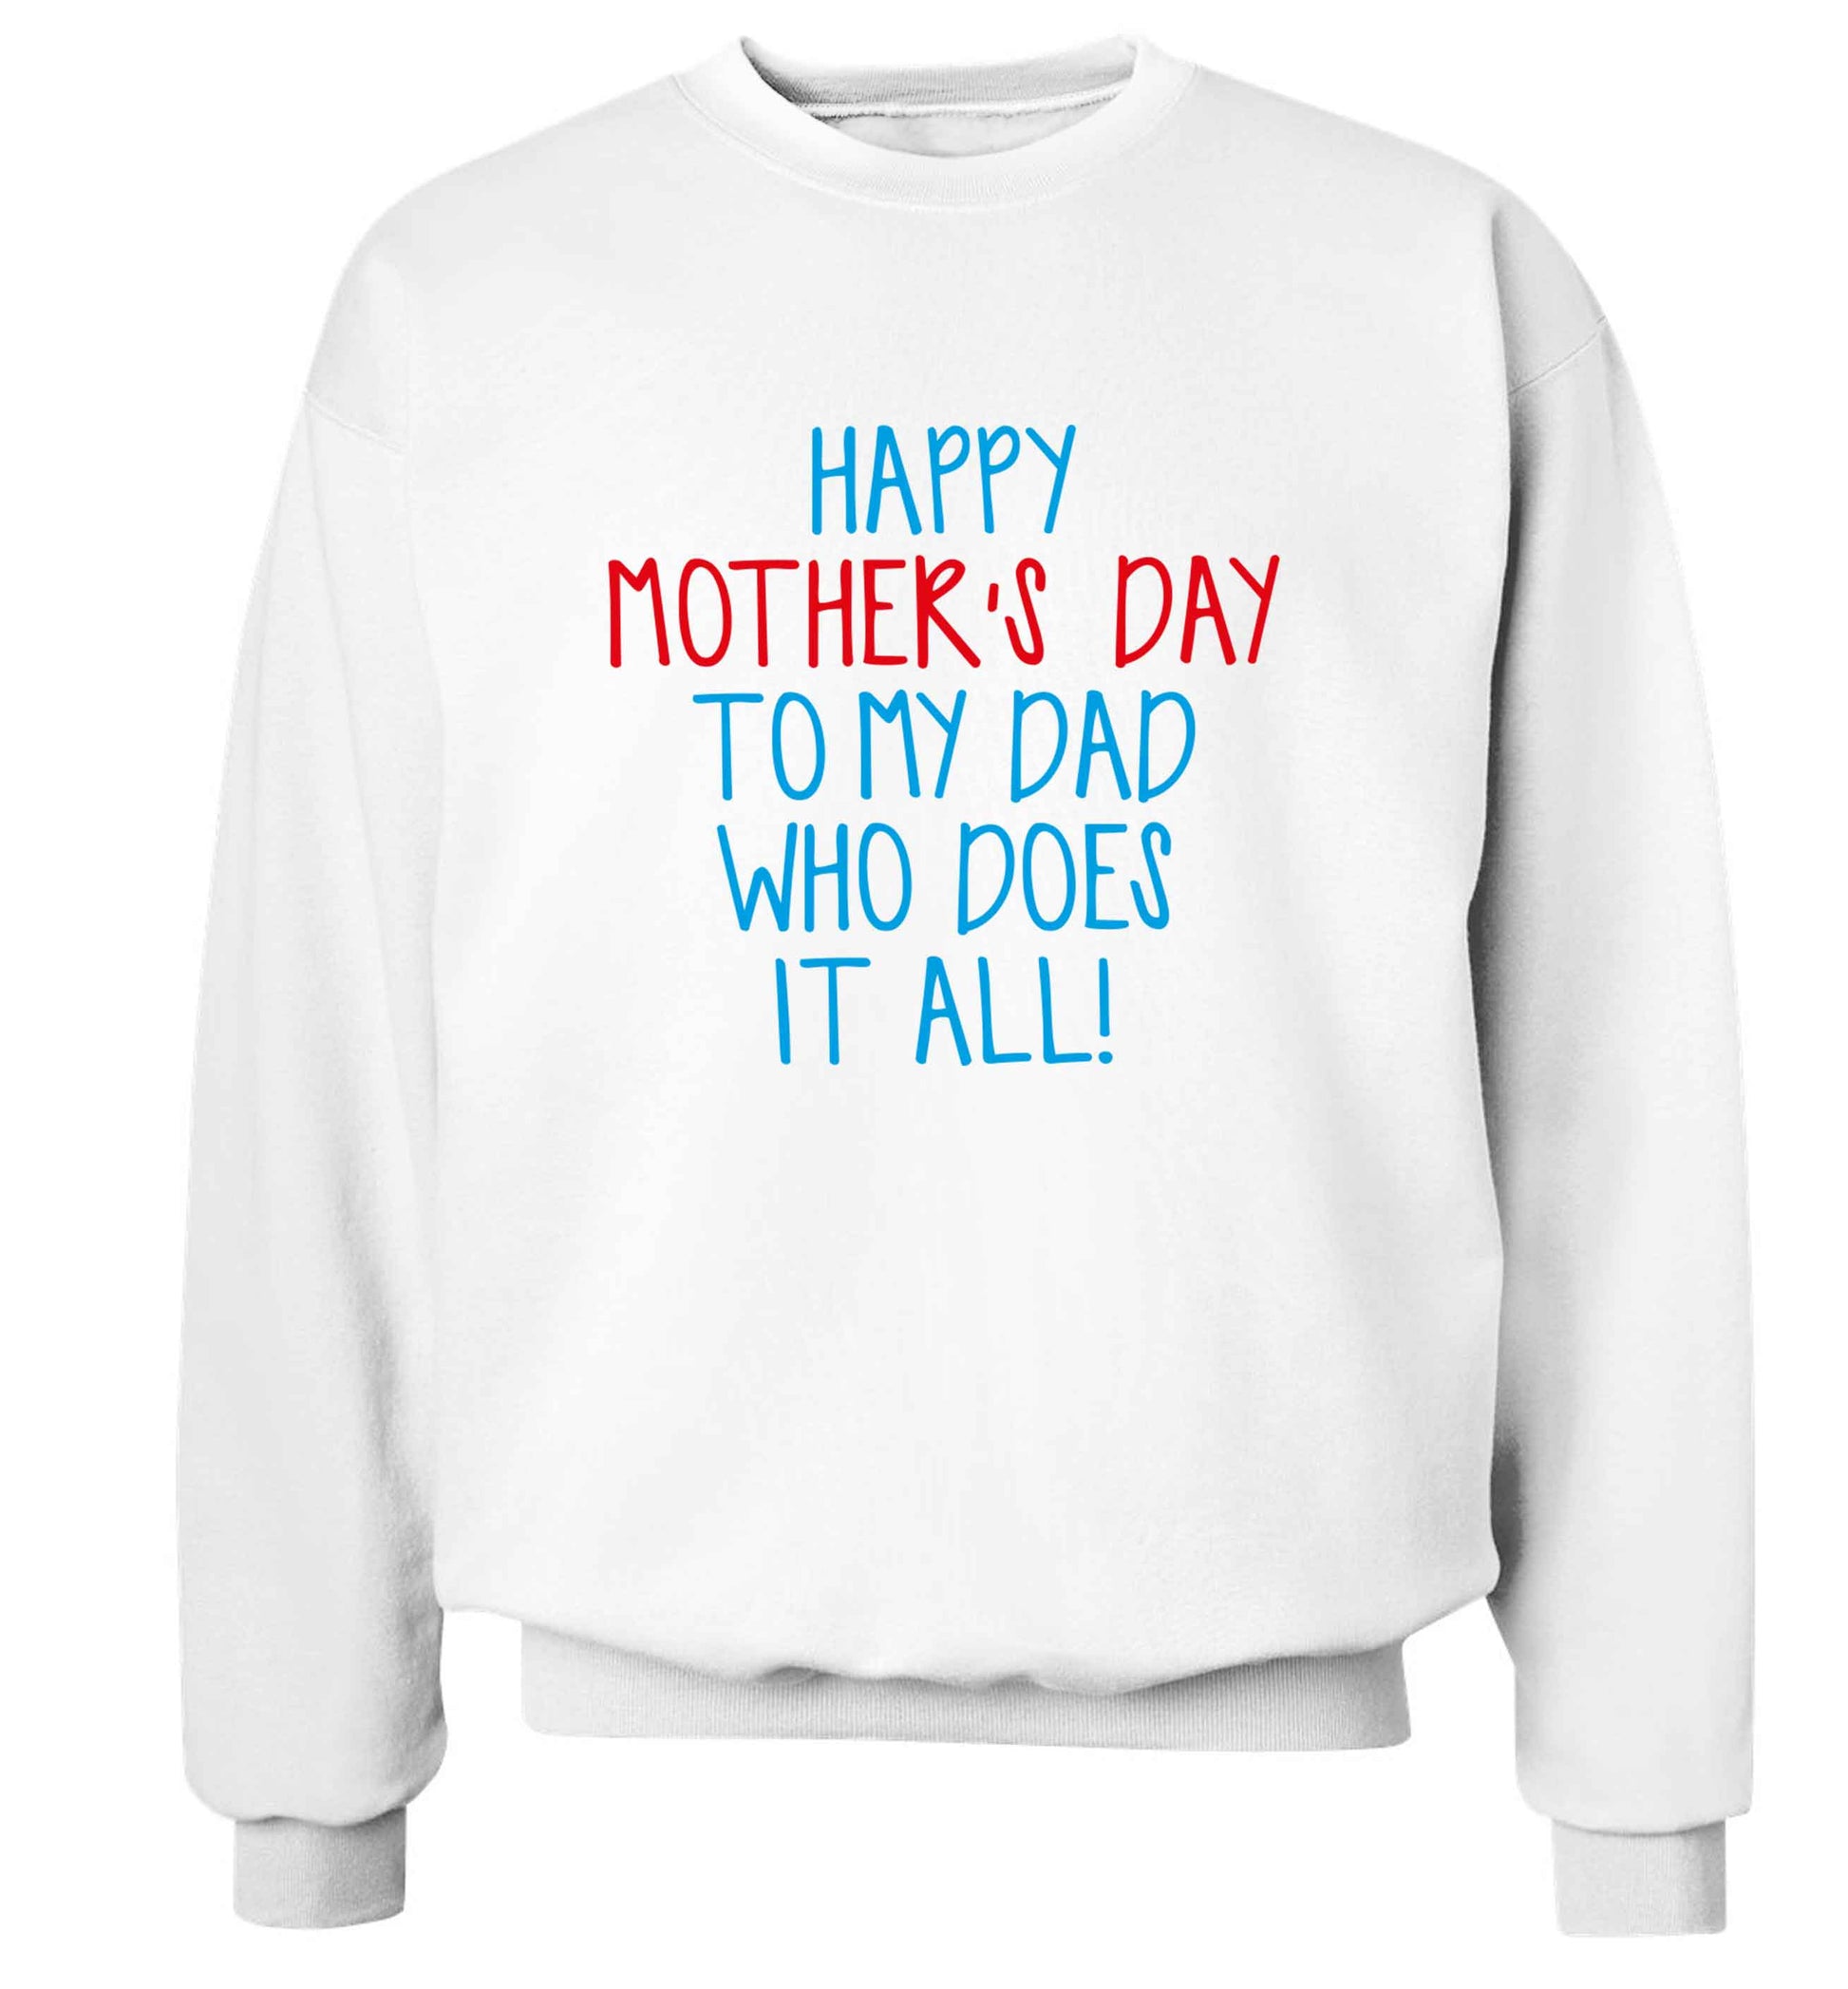 Happy mother's day to my dad who does it all! adult's unisex white sweater 2XL